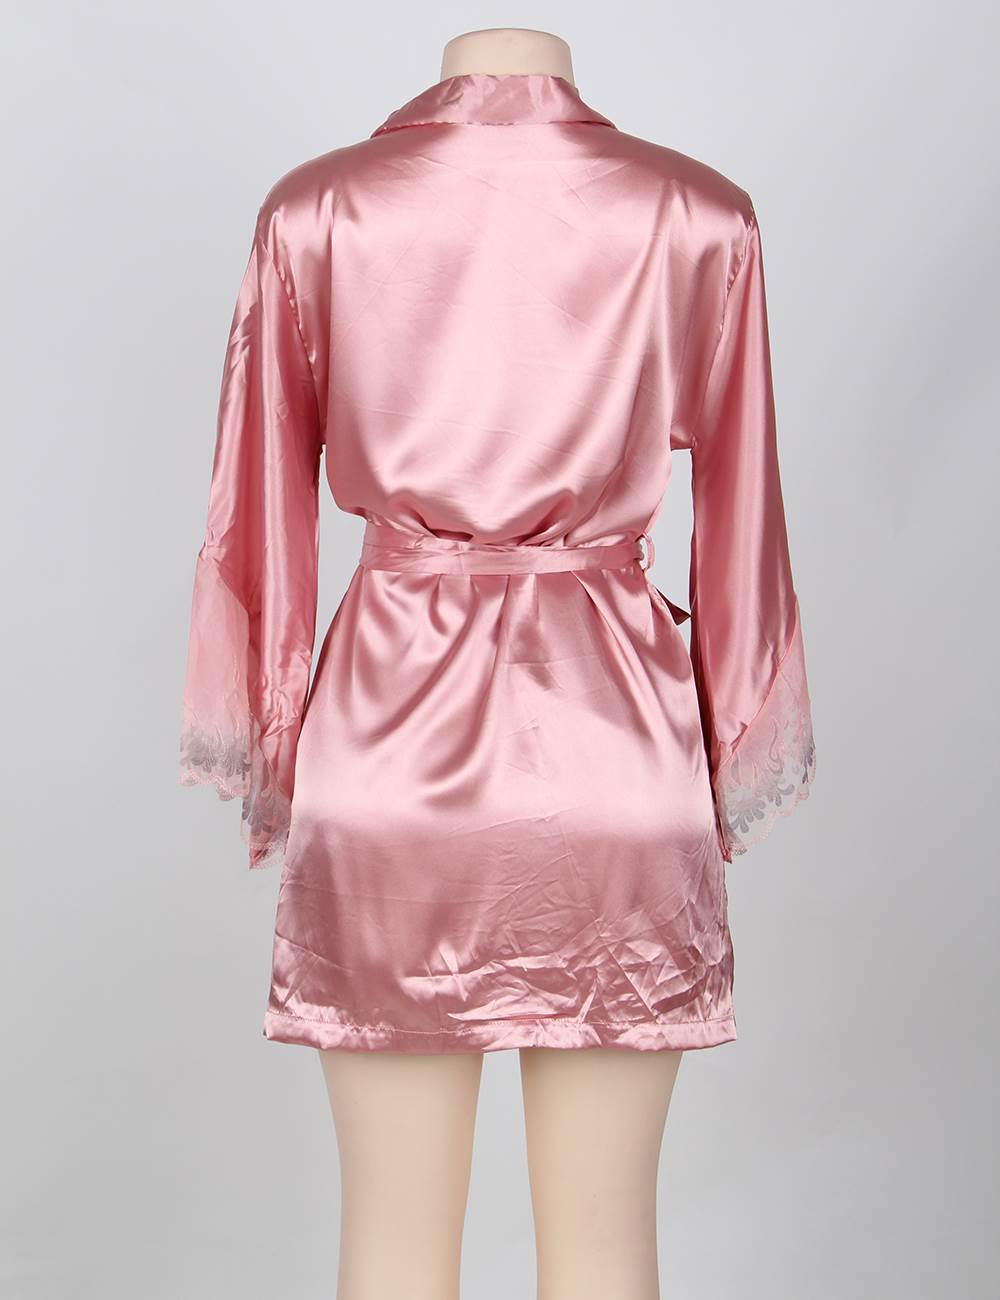 In Stock Two-Piece Satin Pink Belted Sleepwear